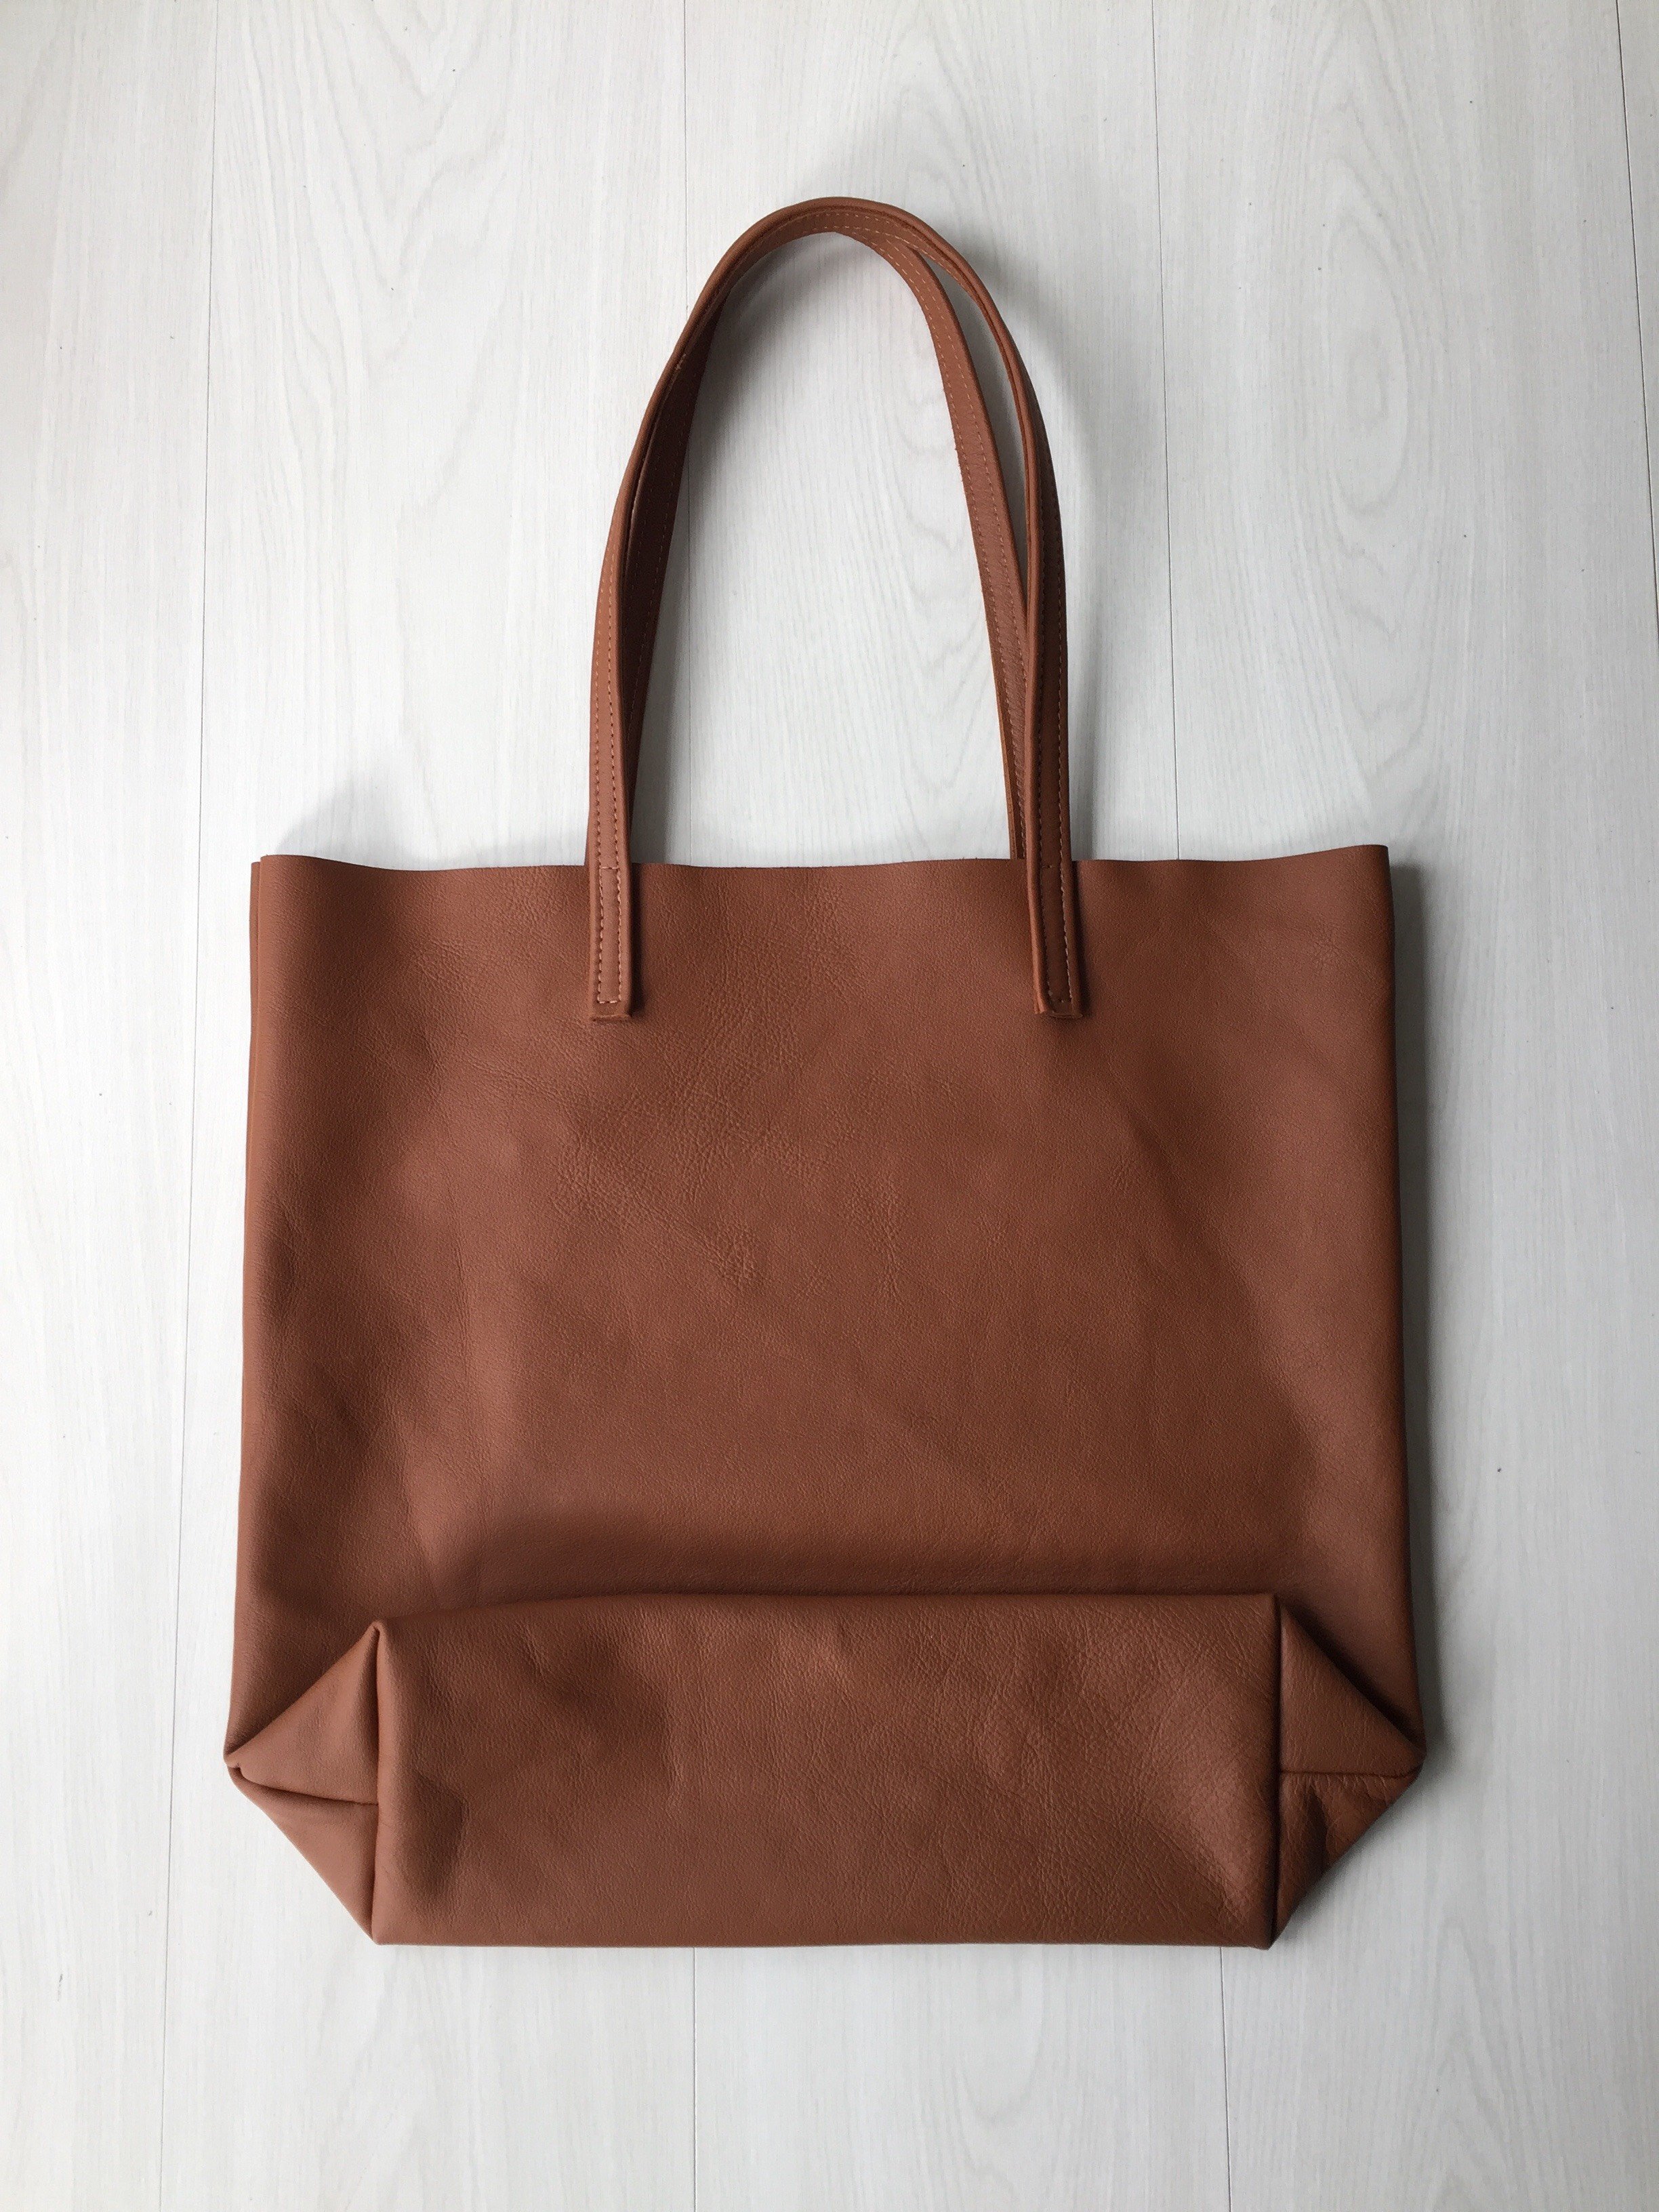 Raw Leather Tote Bag - Cognac Leather